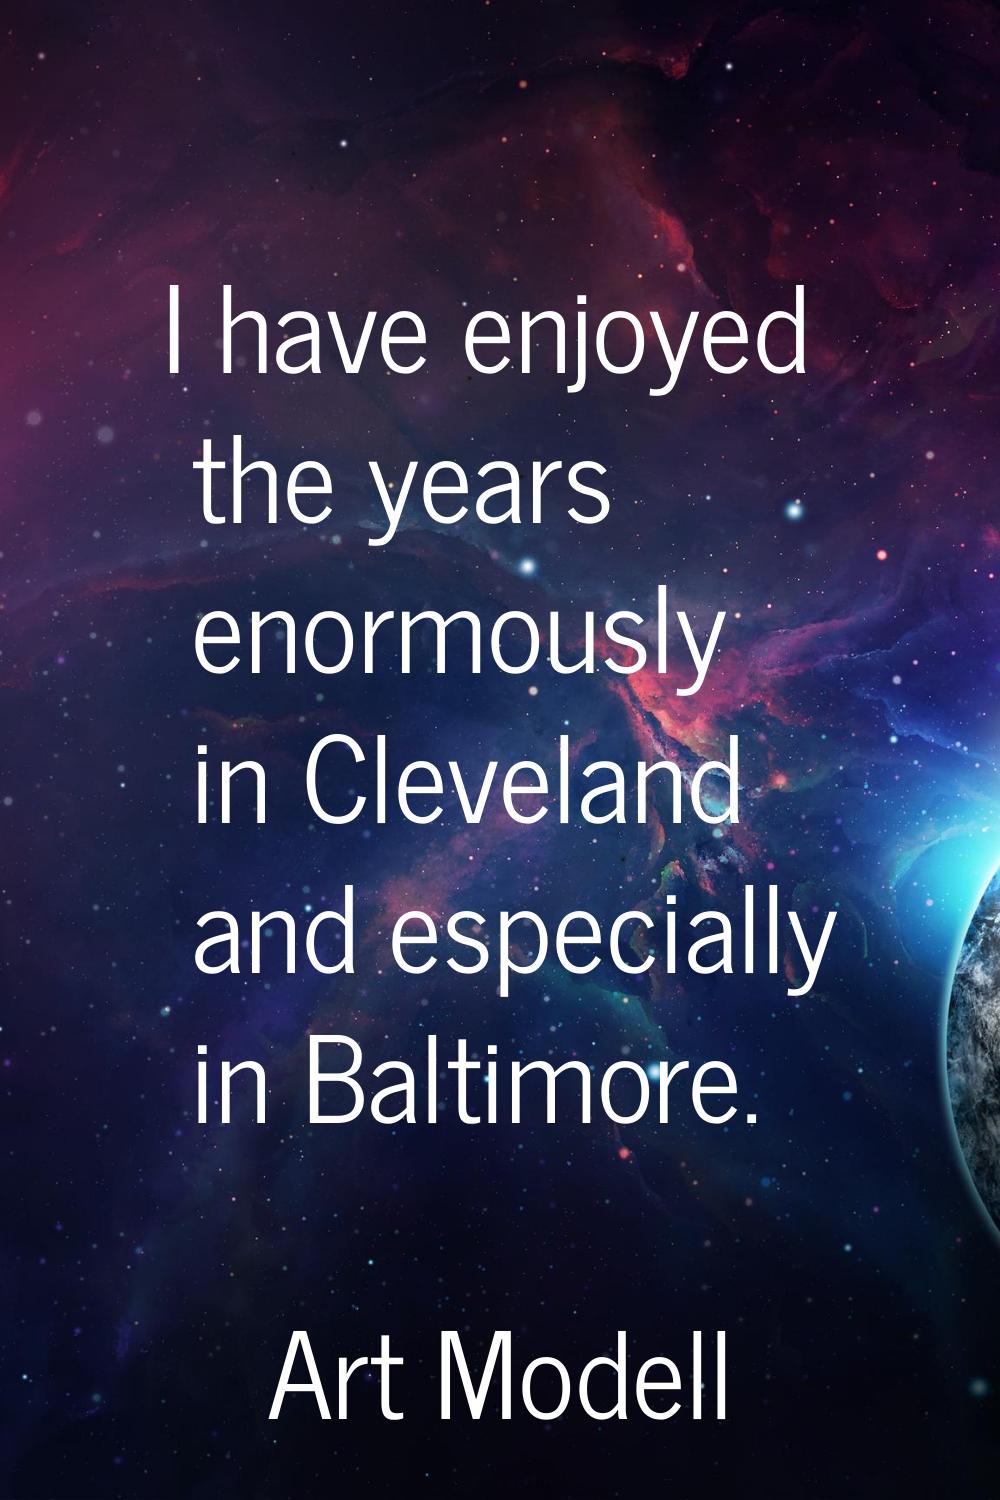 I have enjoyed the years enormously in Cleveland and especially in Baltimore.